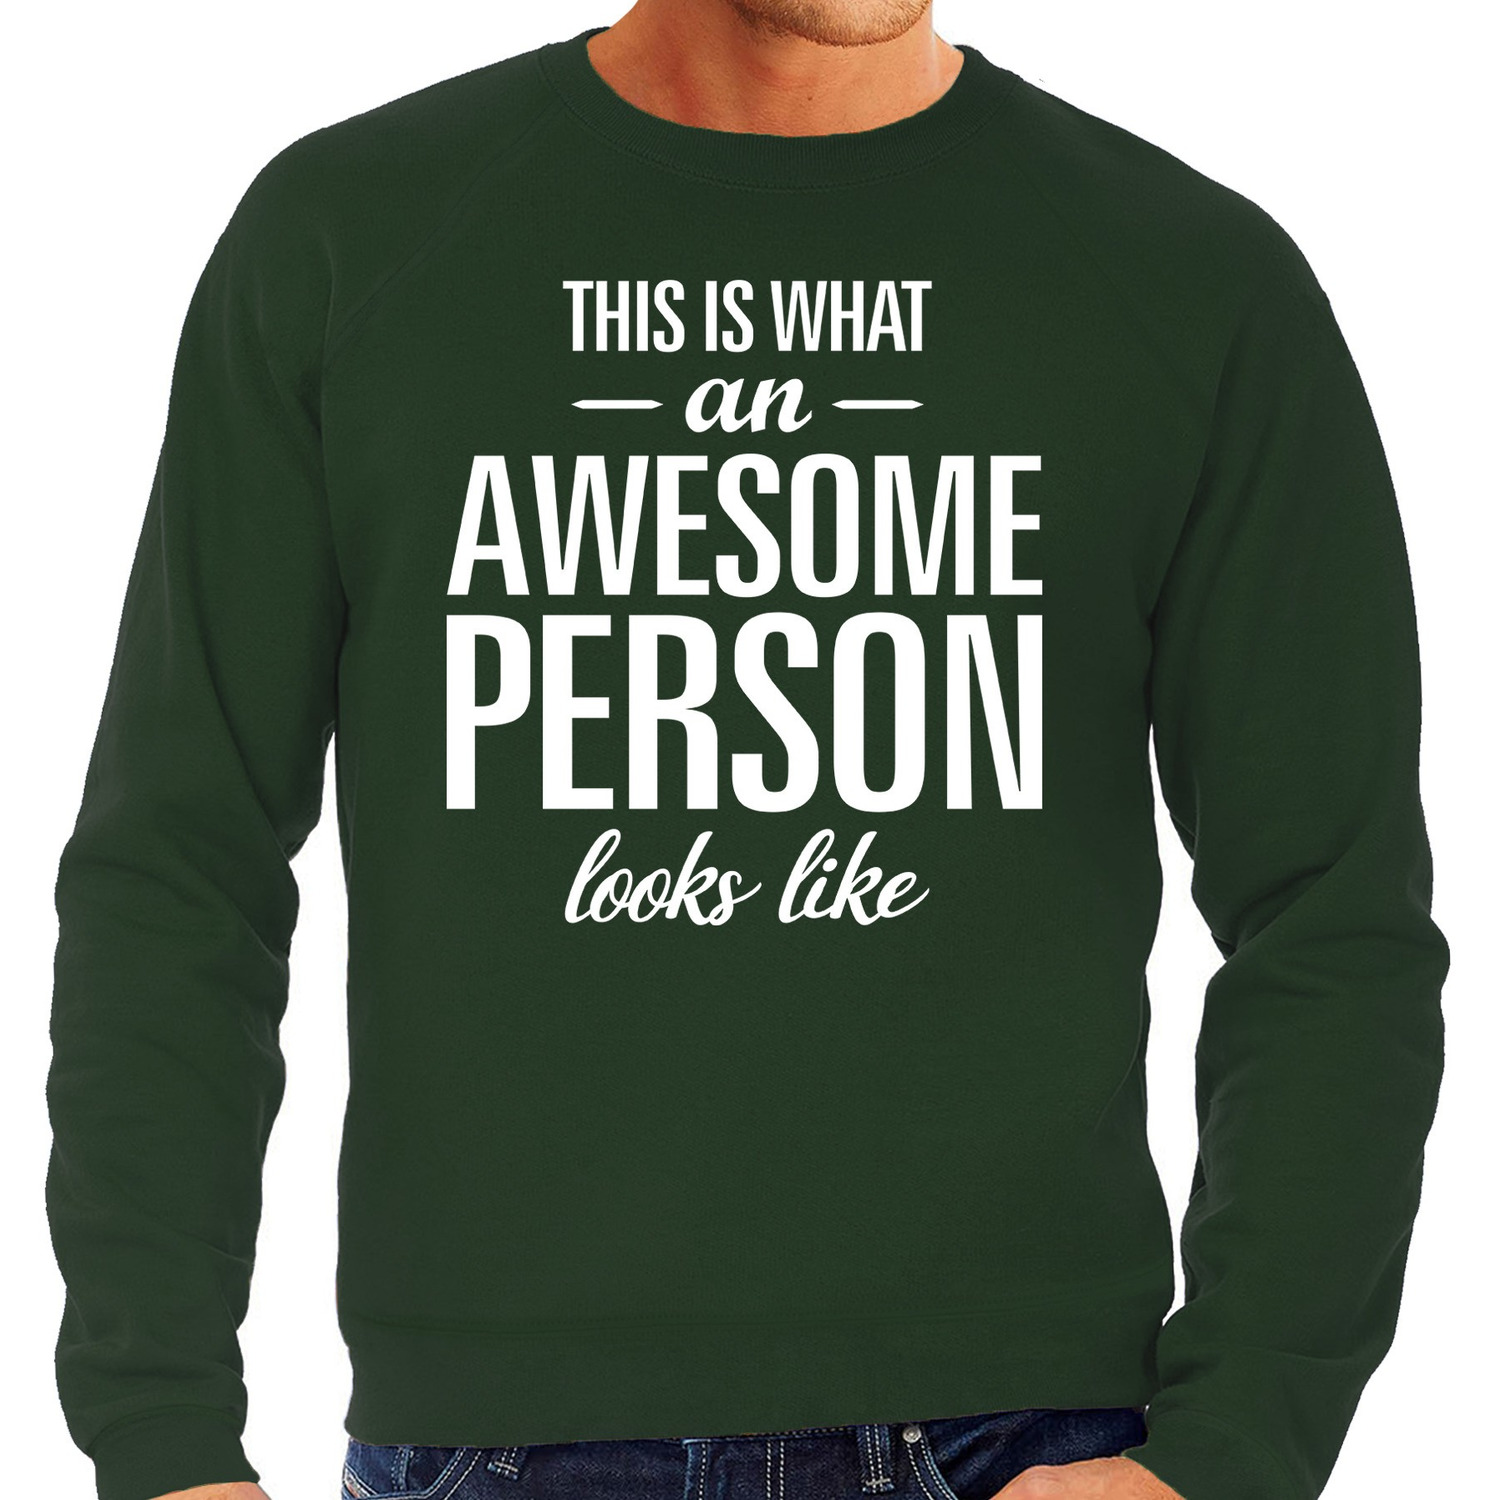 Awesome person / persoon cadeau sweater groen heren